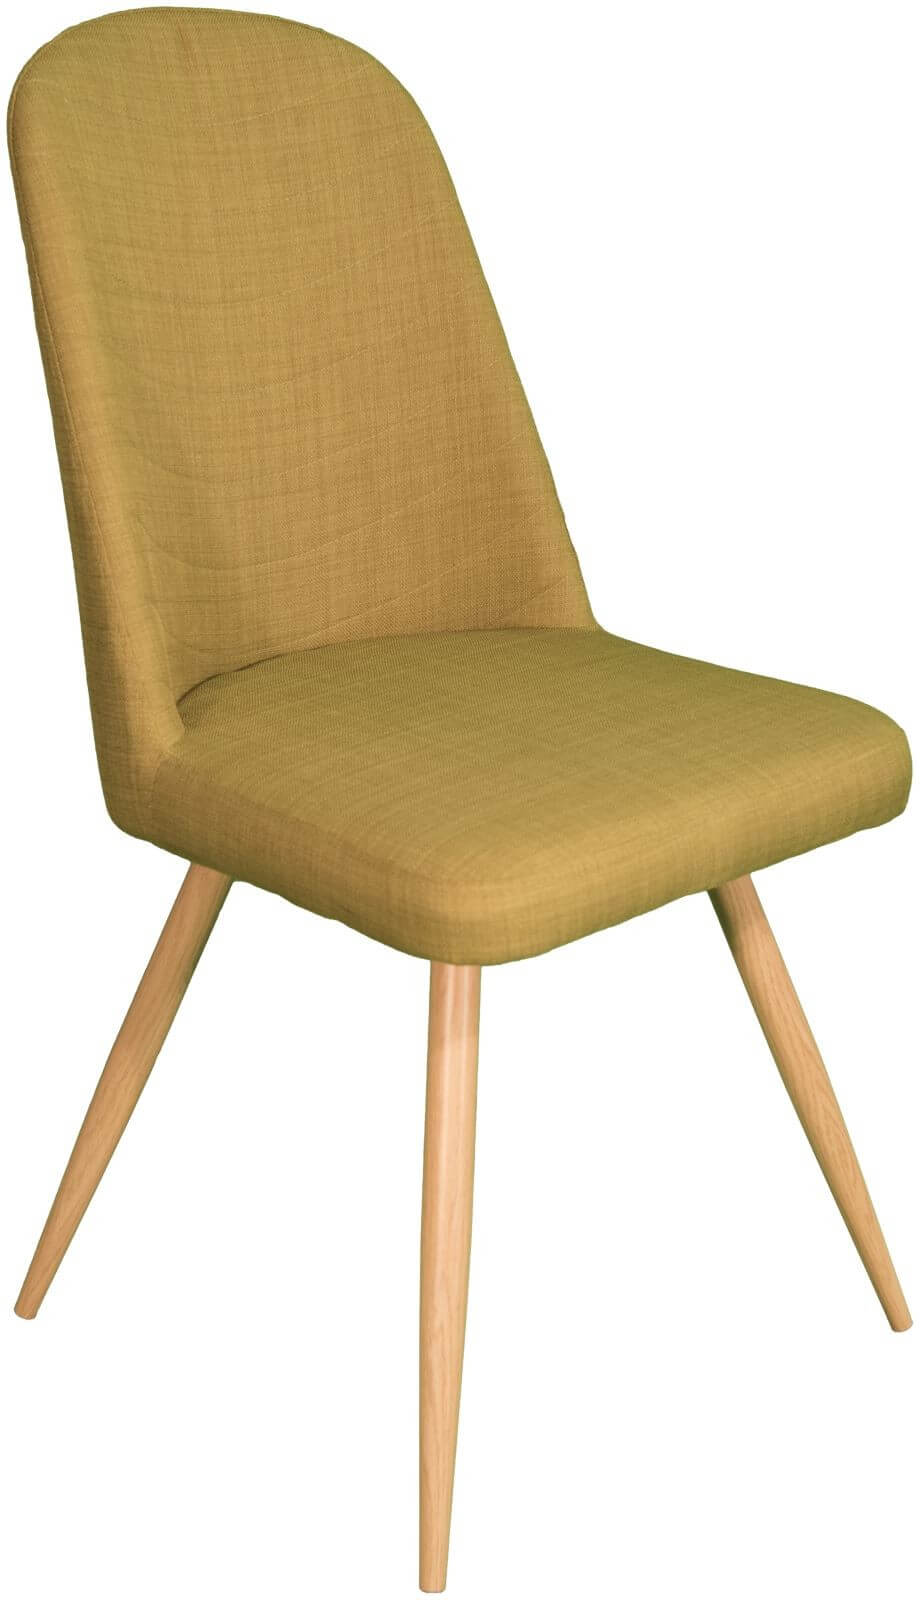 Showing image for Cancun high-back dining chair